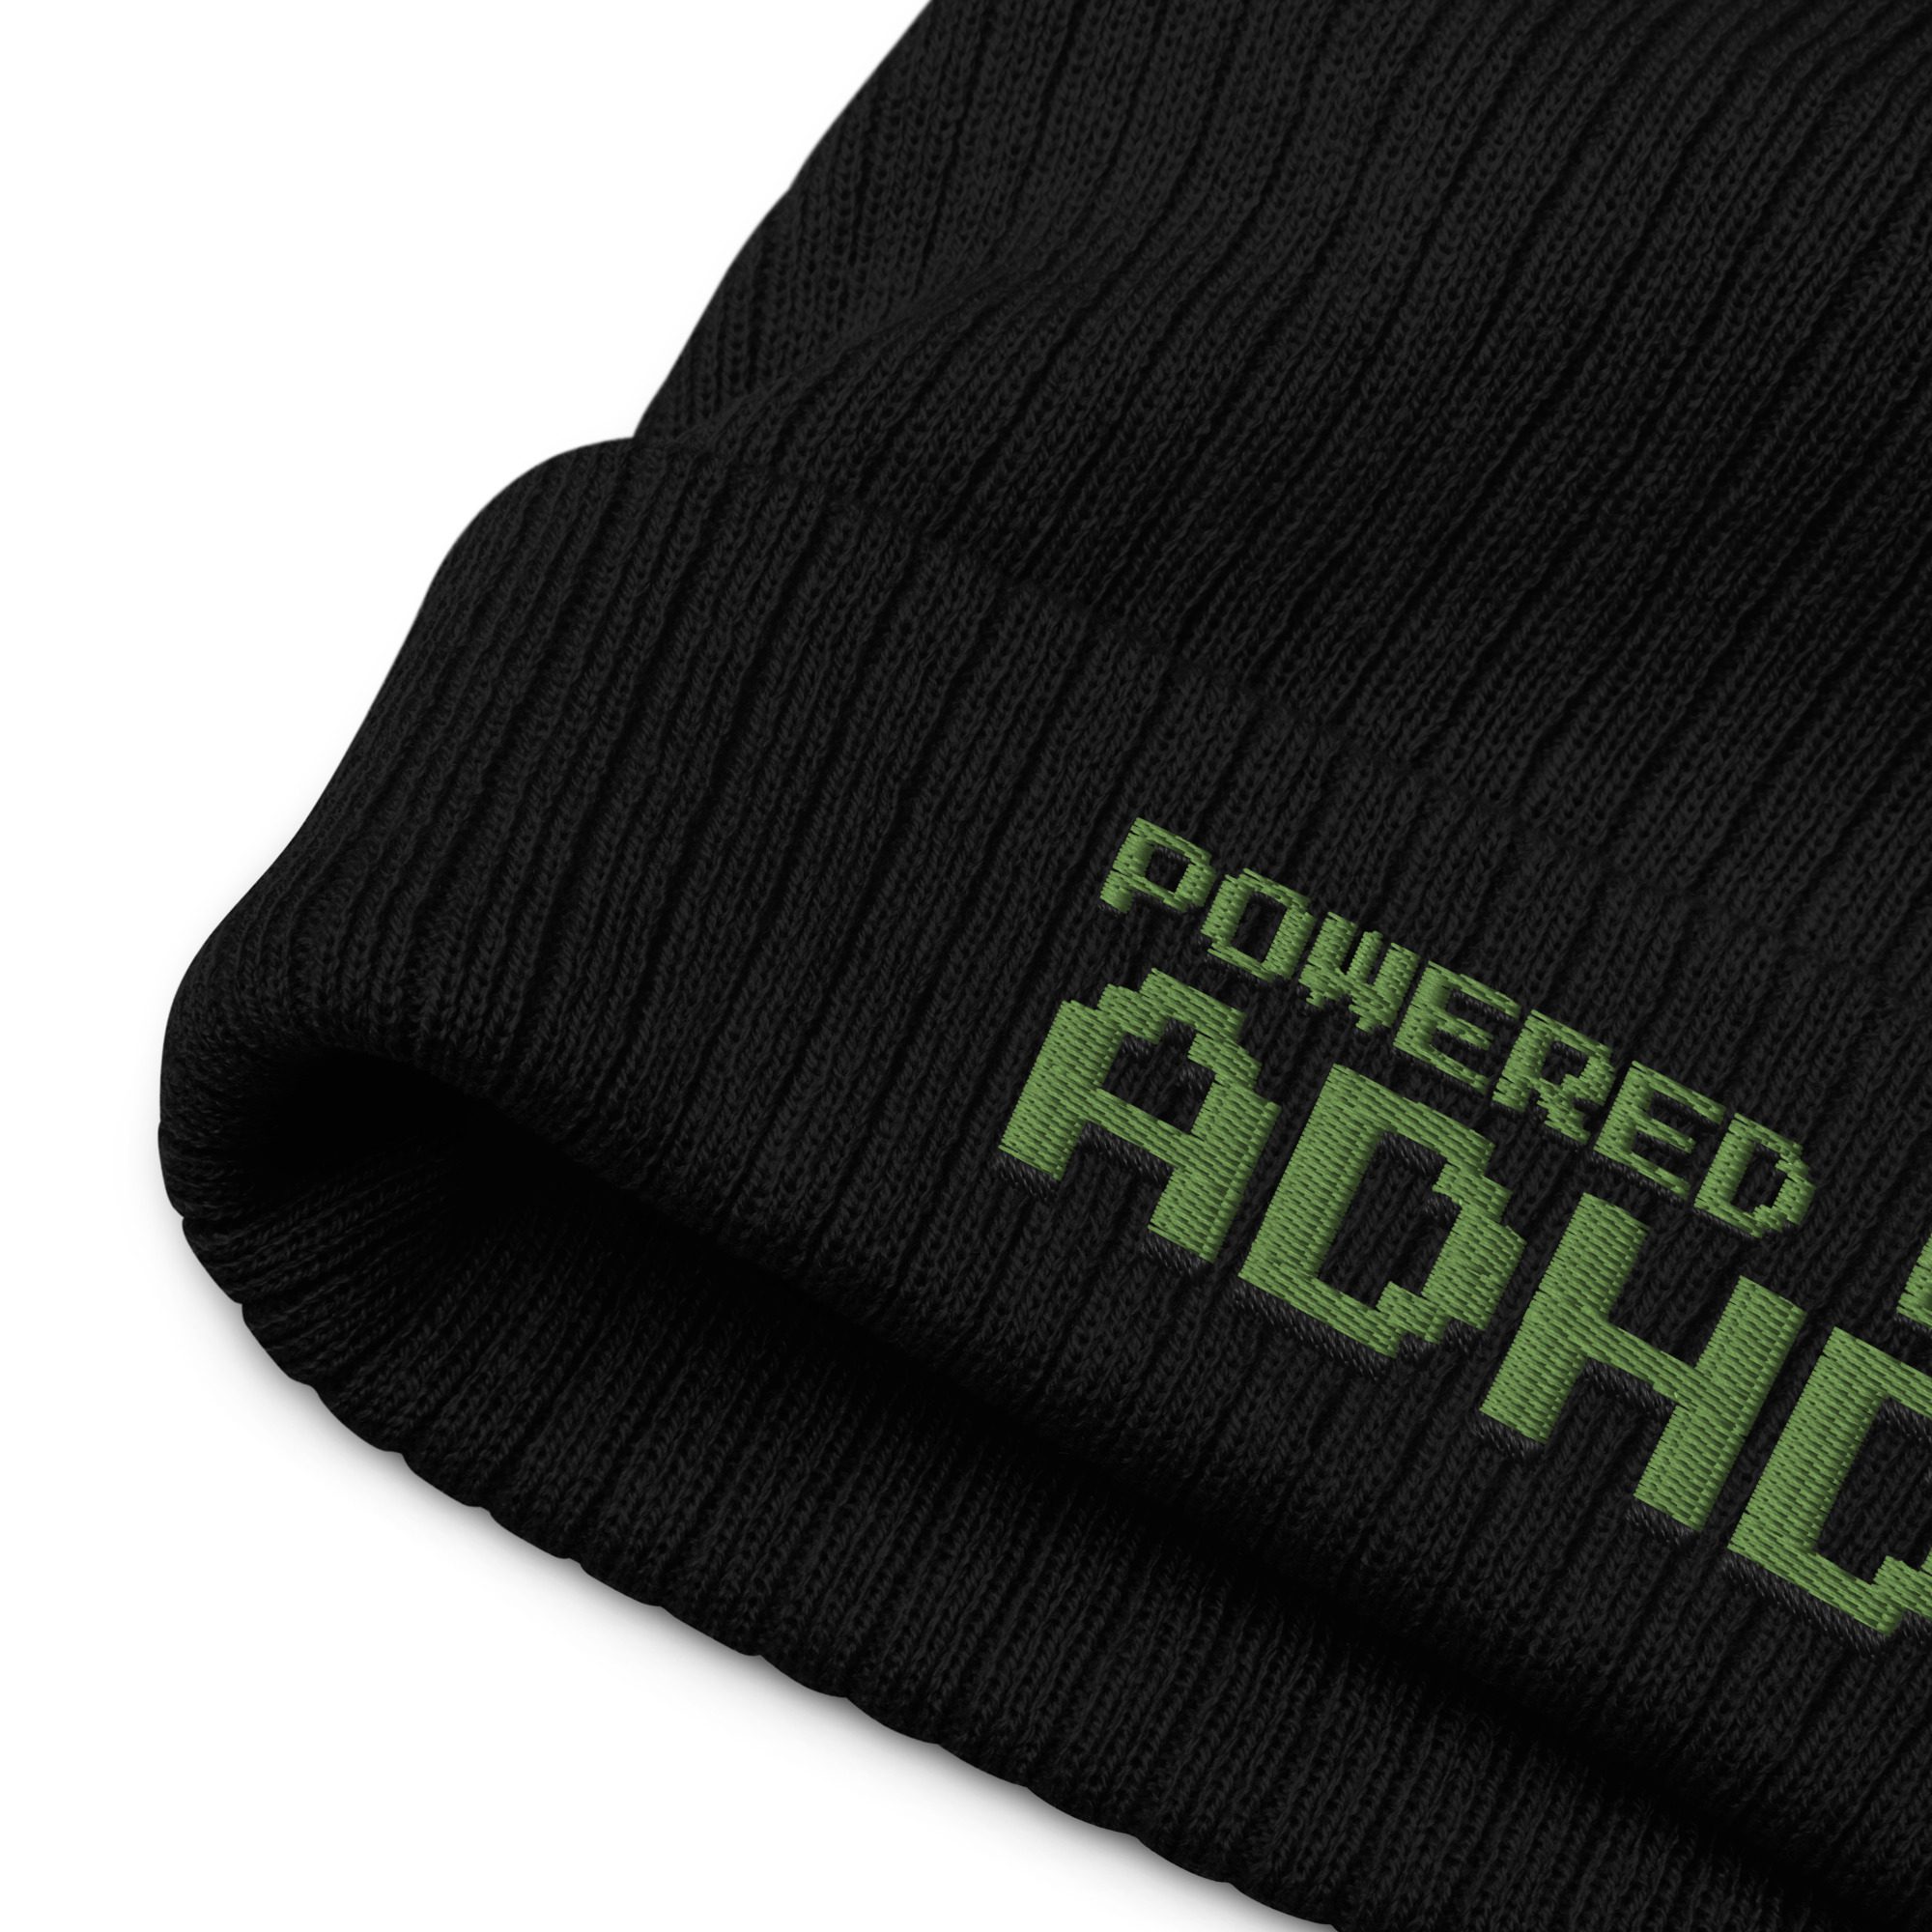 Powered By ADHD Ribbed Knit Beanie